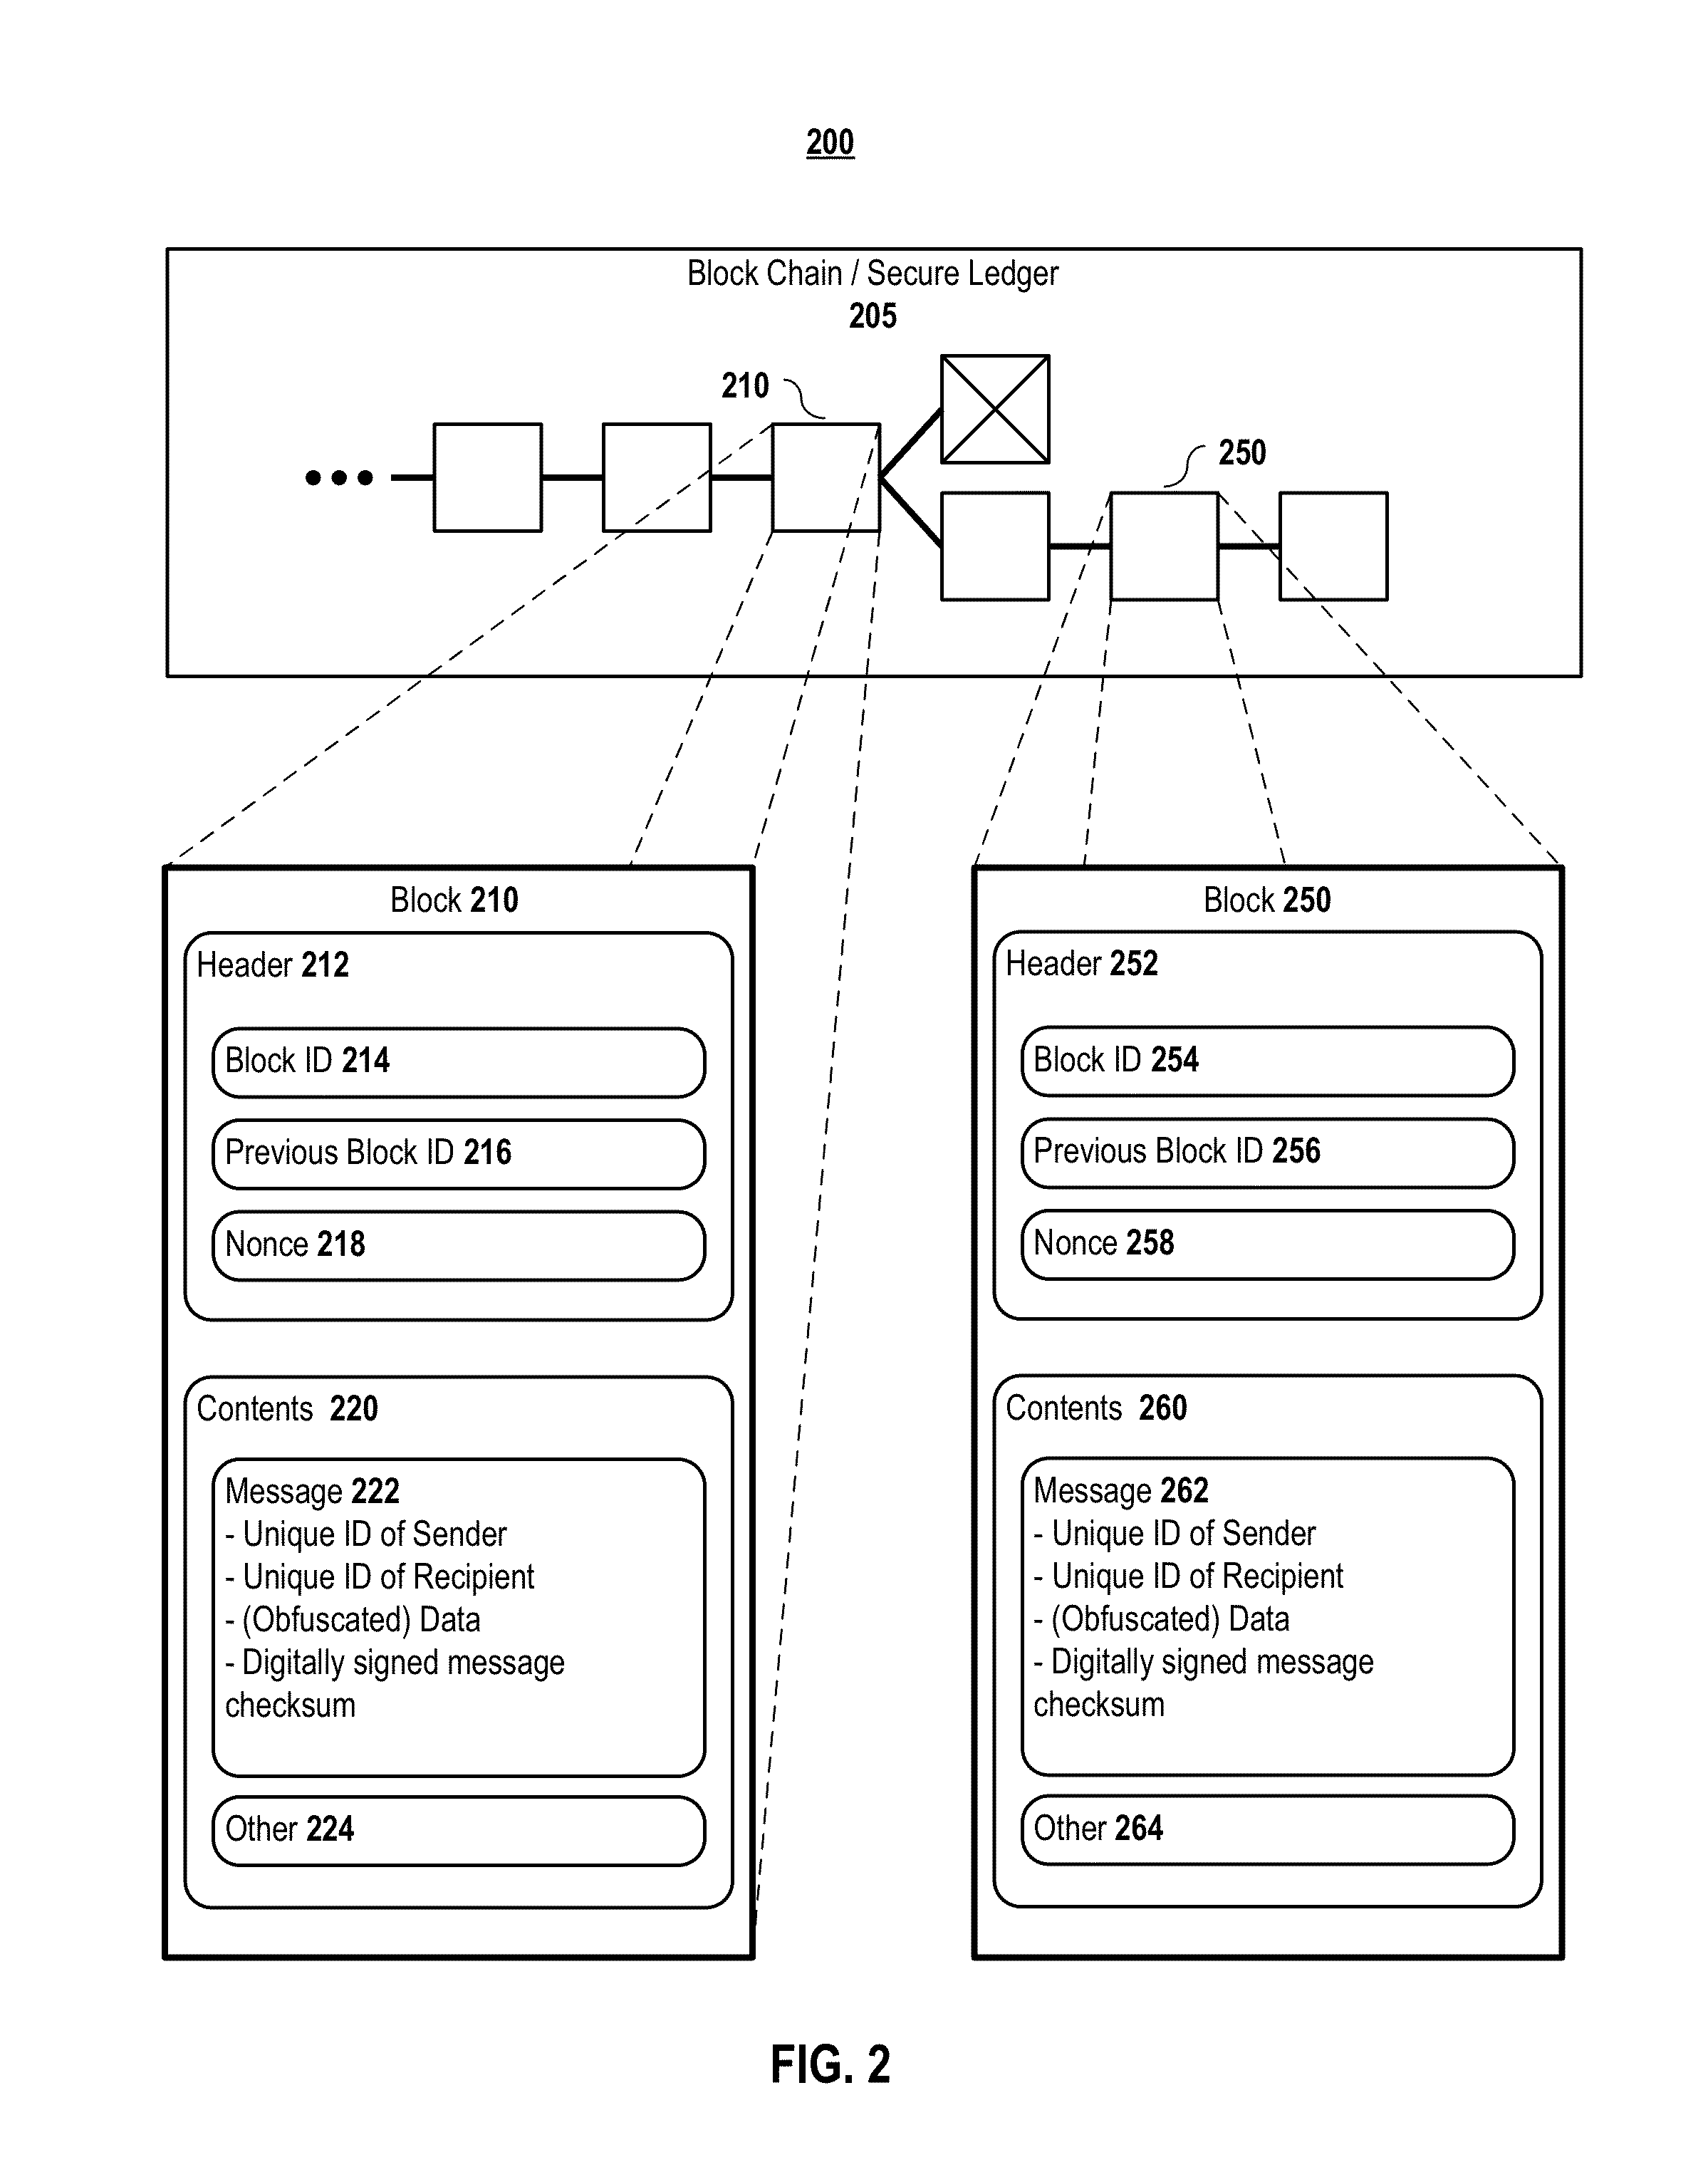 Deferred configuration or instruction execution using a secure distributed transaction ledger